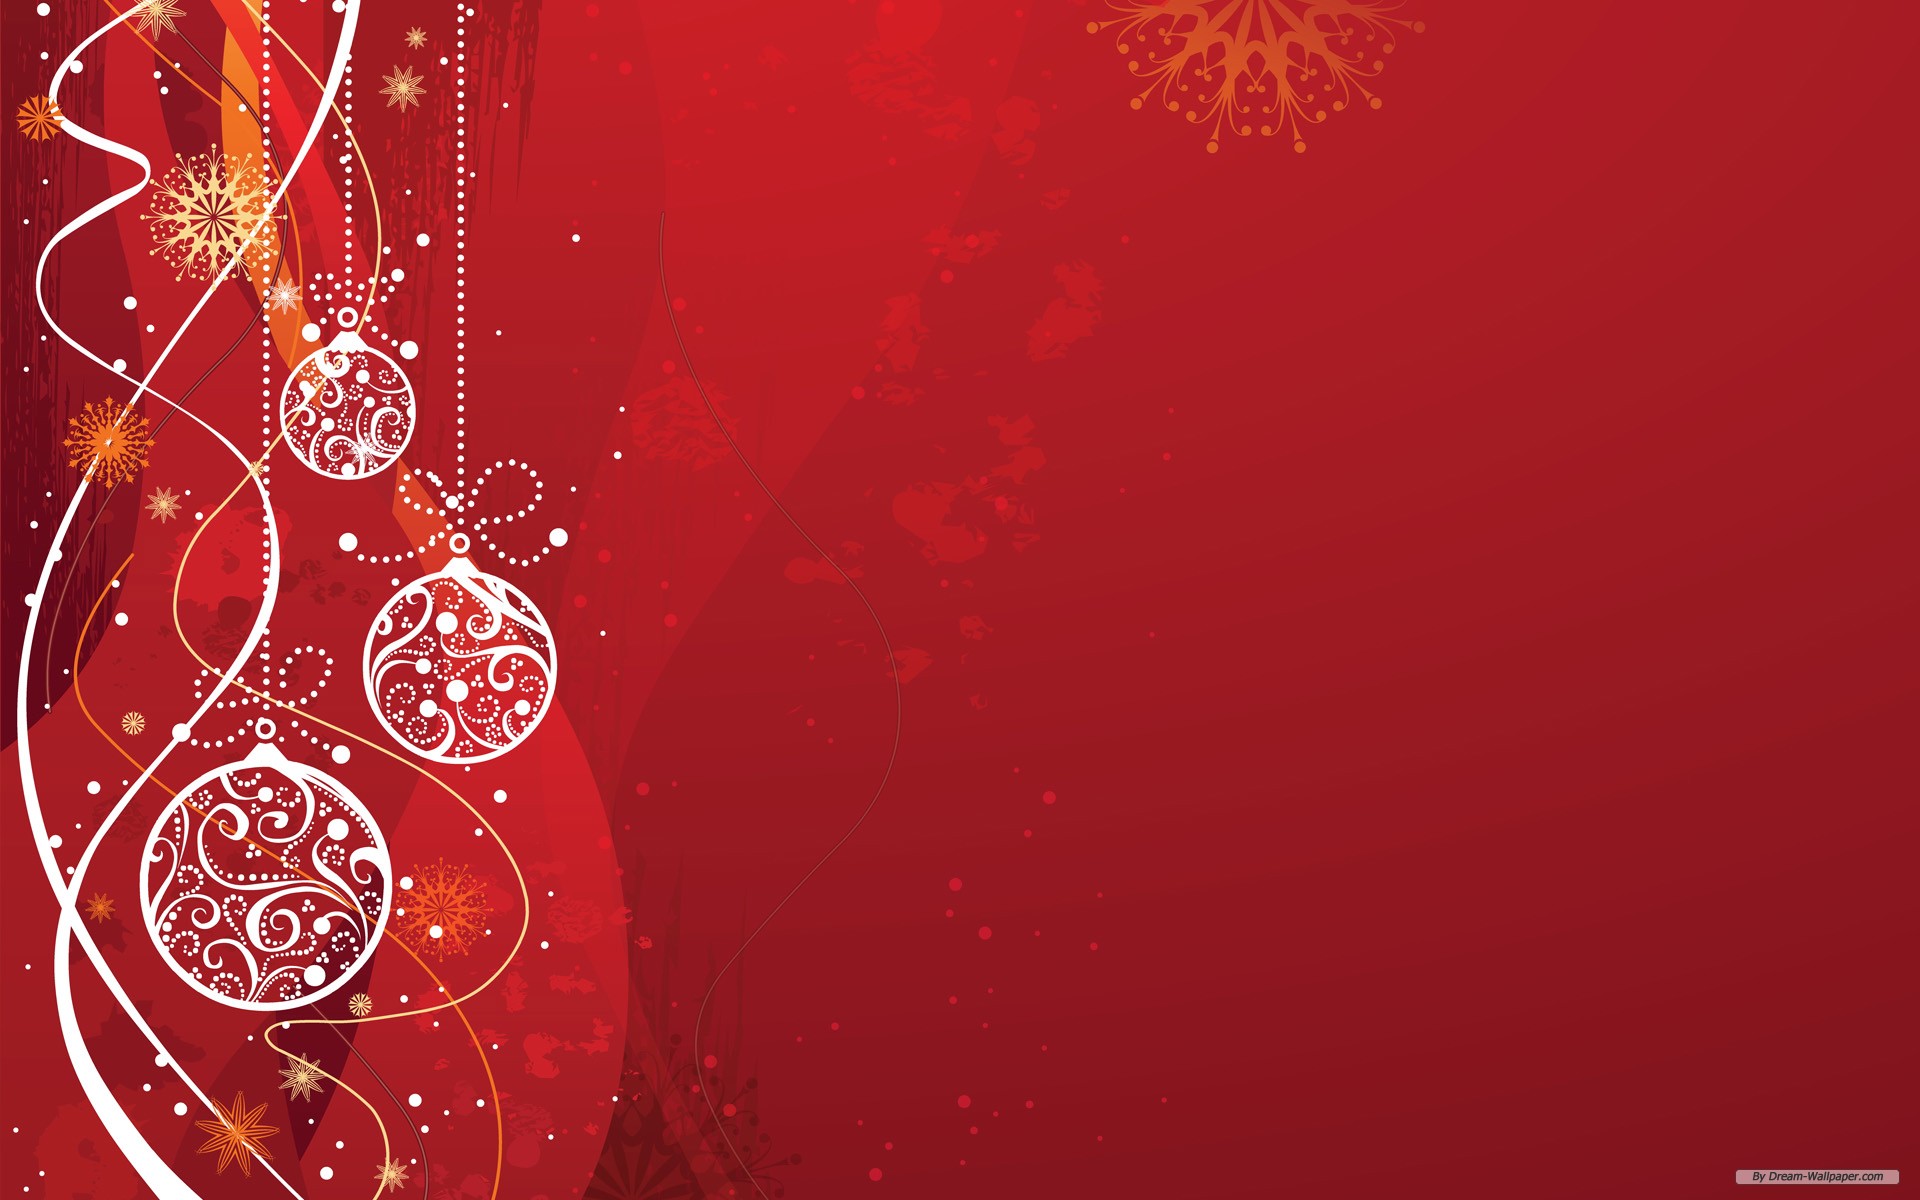 Free Holiday Backgrounds wallpaper 1920x1200 26415